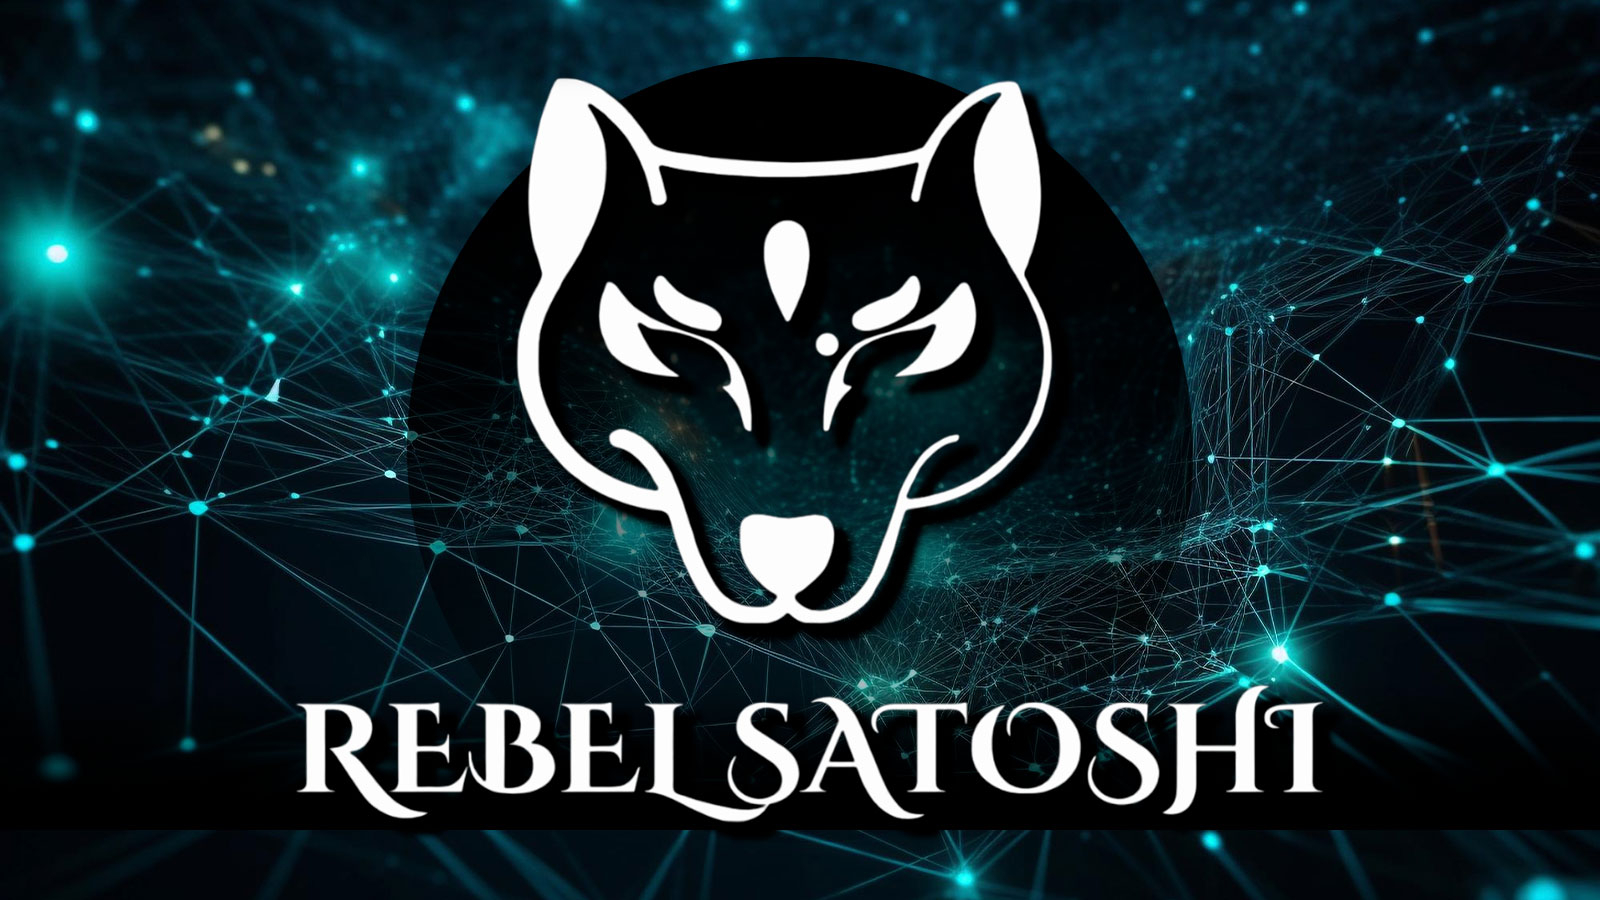 Chainlink (LINK) and Polkadot (DOT) Holders Capitalize on Bullrun, RECQ New Rebel Satoshi Token is Here